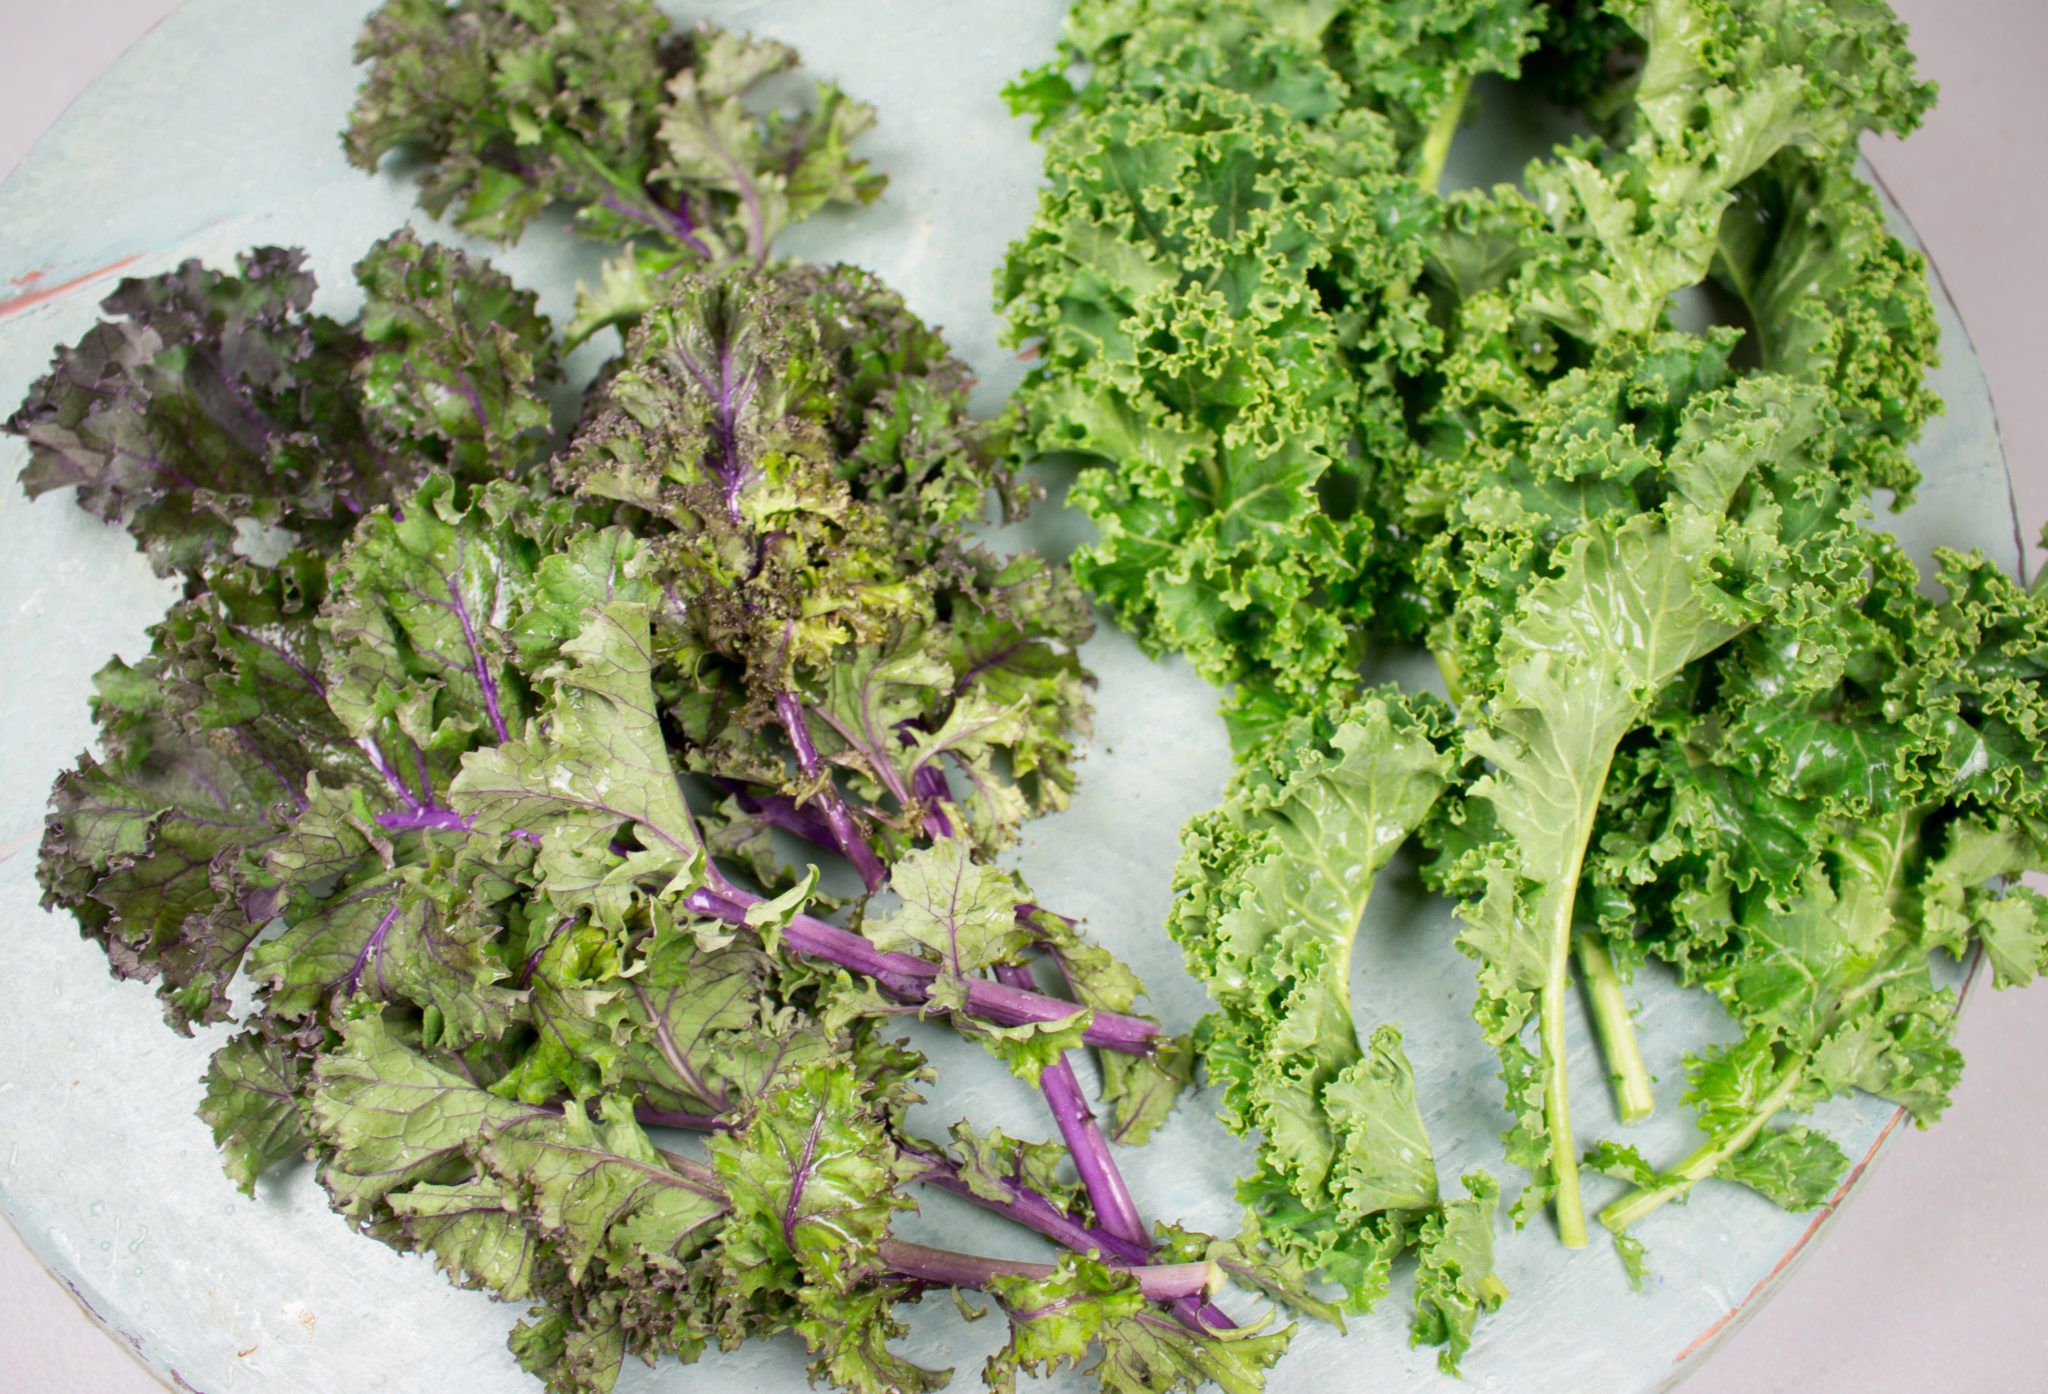 Beautiful fresh organic kale red, green or whatever your favorite make delicious and crazy easy. www.veganglutenfreelife.com/kale-chips/